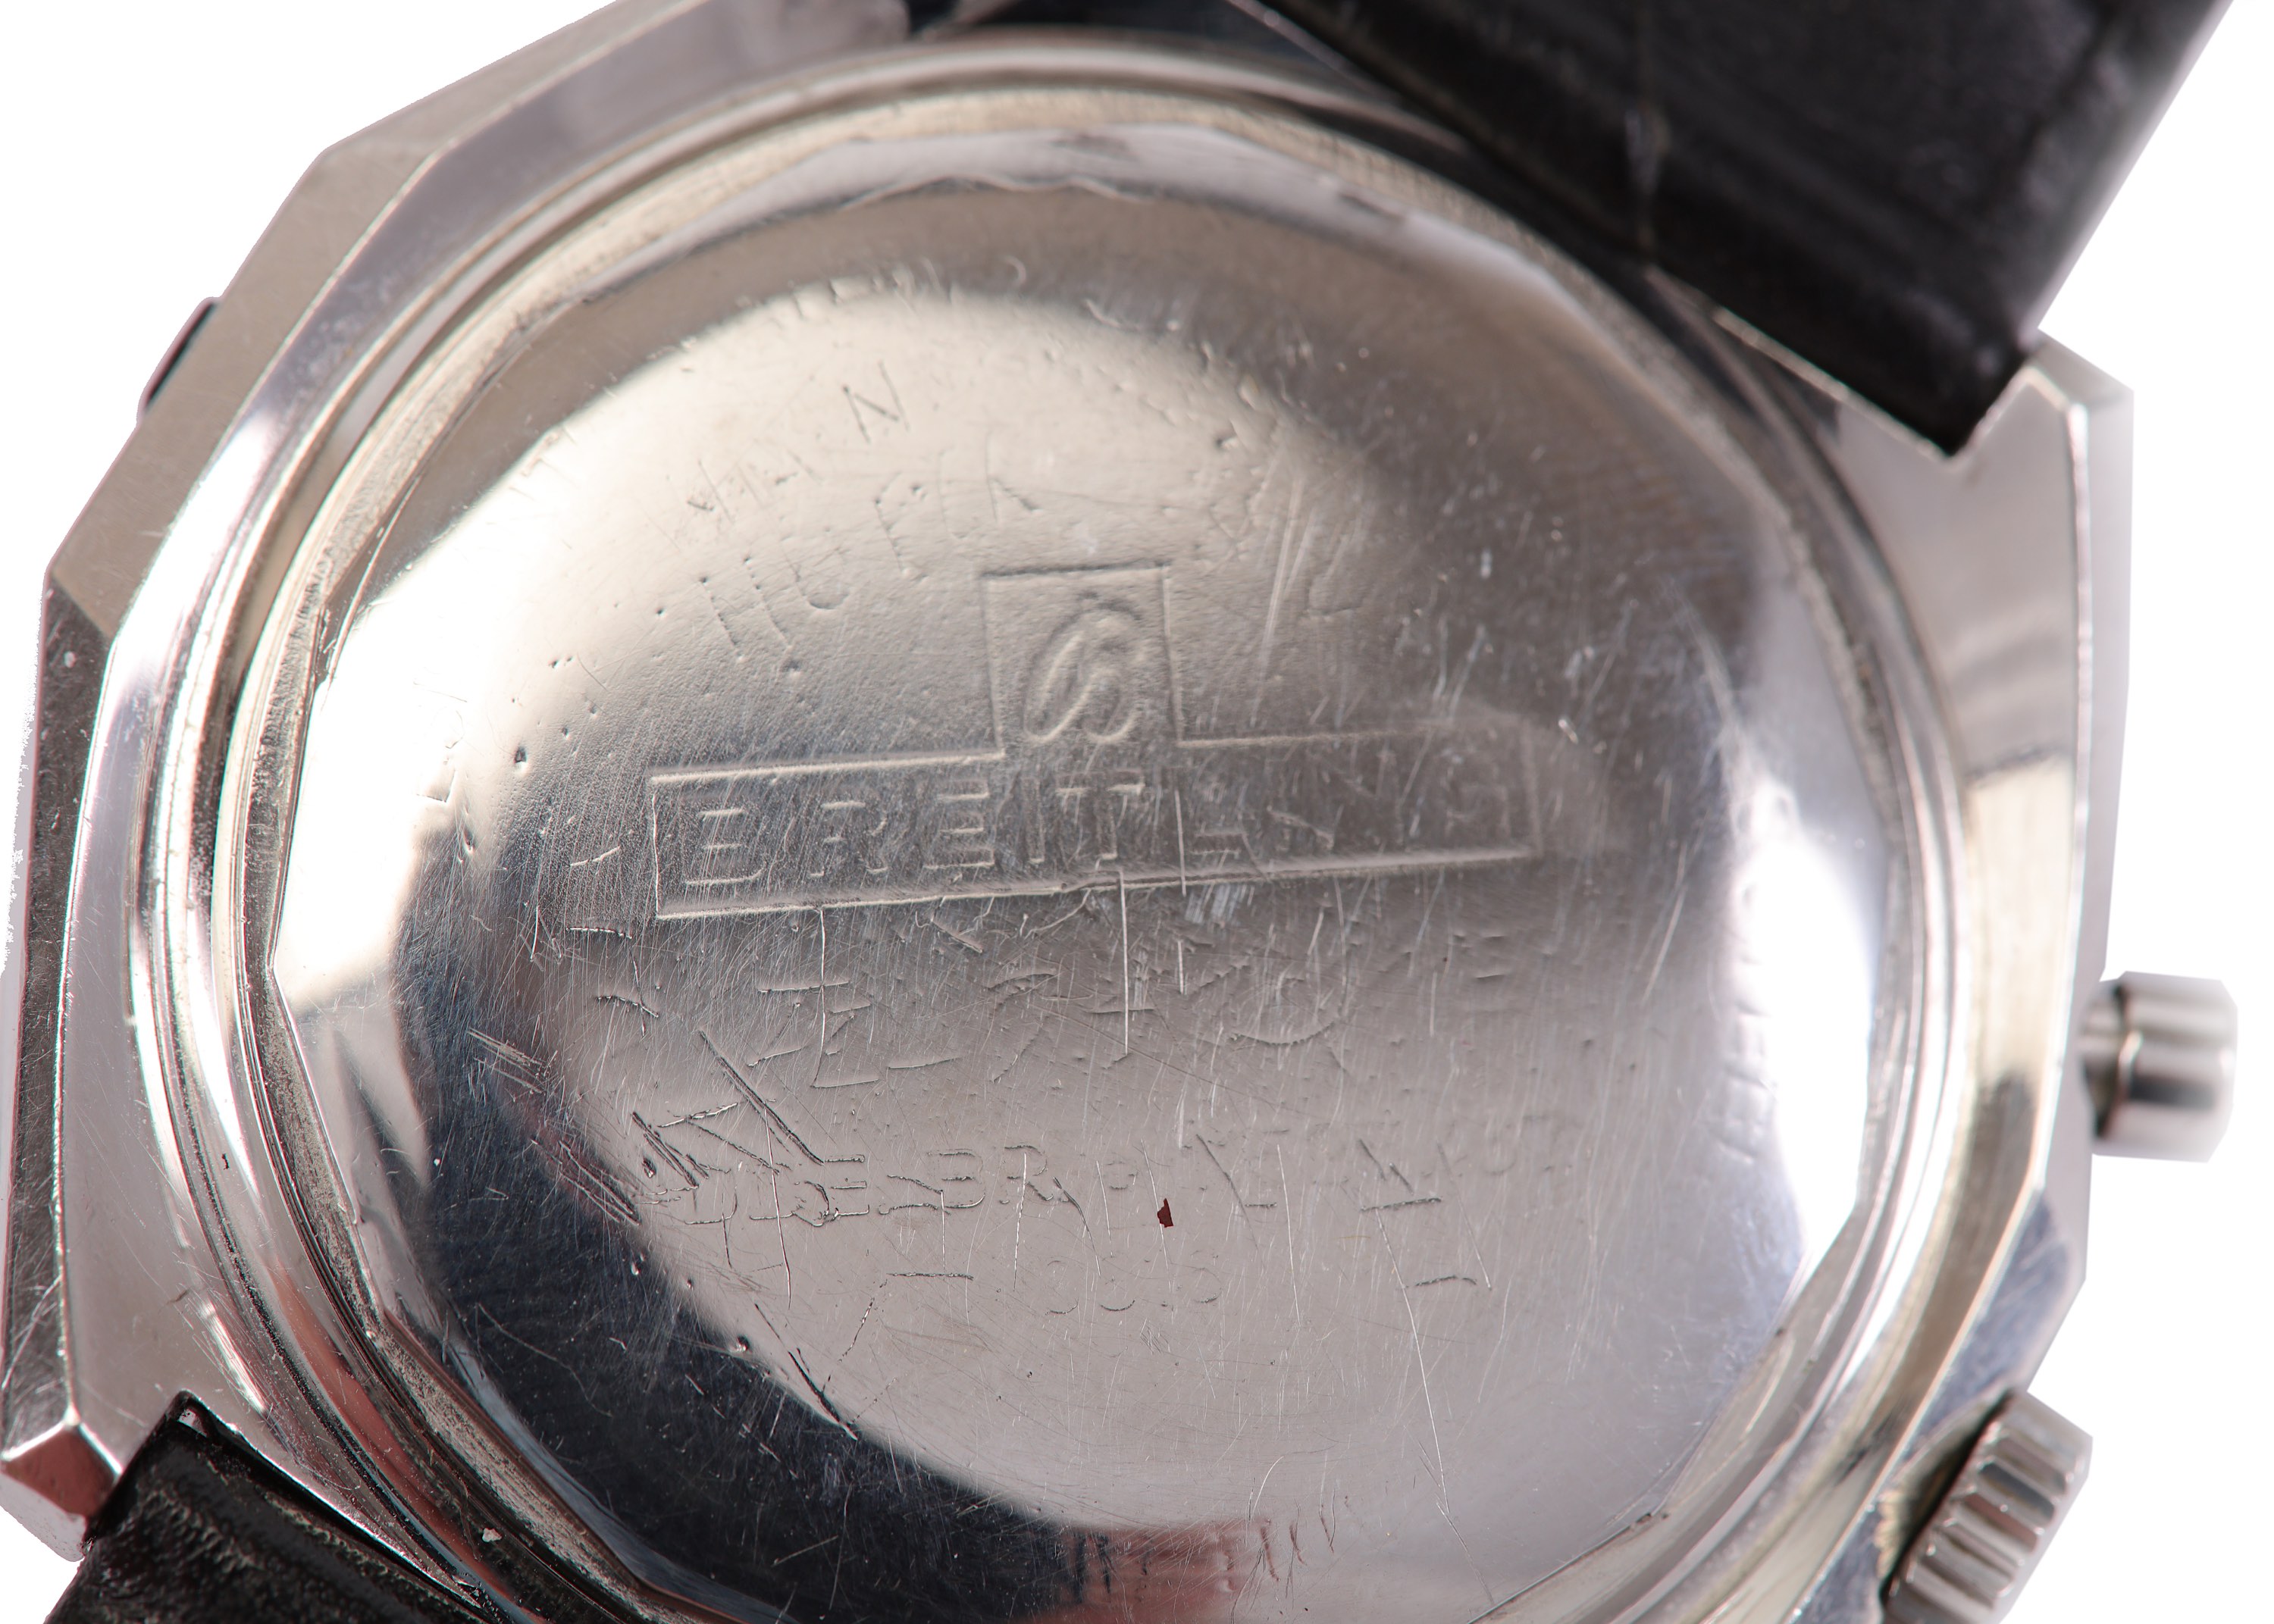 BREITLING. A OVERSIZED STAINLESS STEEL MANUAL WIND CHRONOGRAPH WRISTWATCH. Date: Circa 1967. - Image 3 of 6